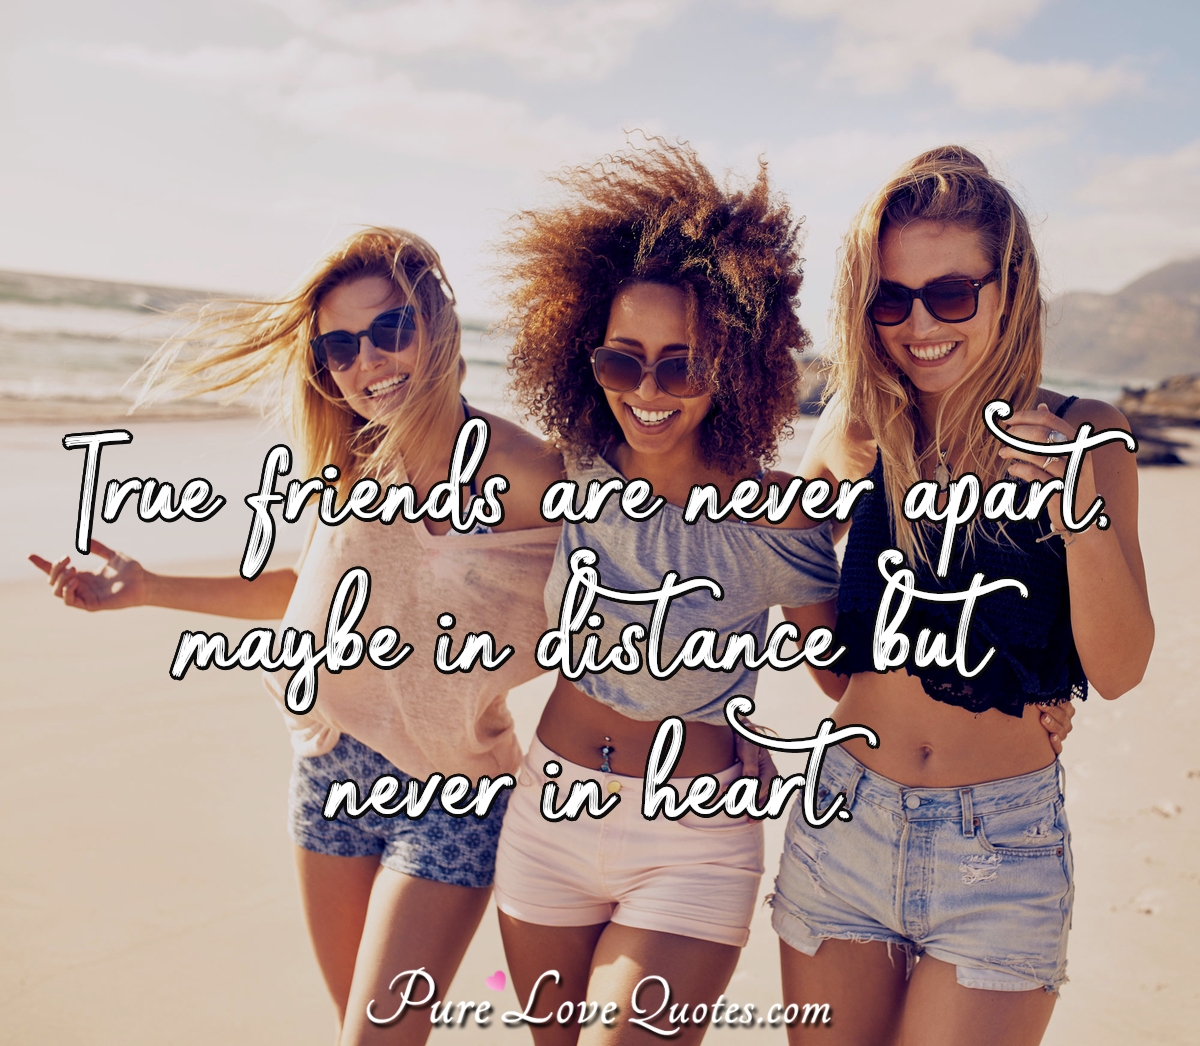 True friends are never apart, maybe in distance but never in heart ...